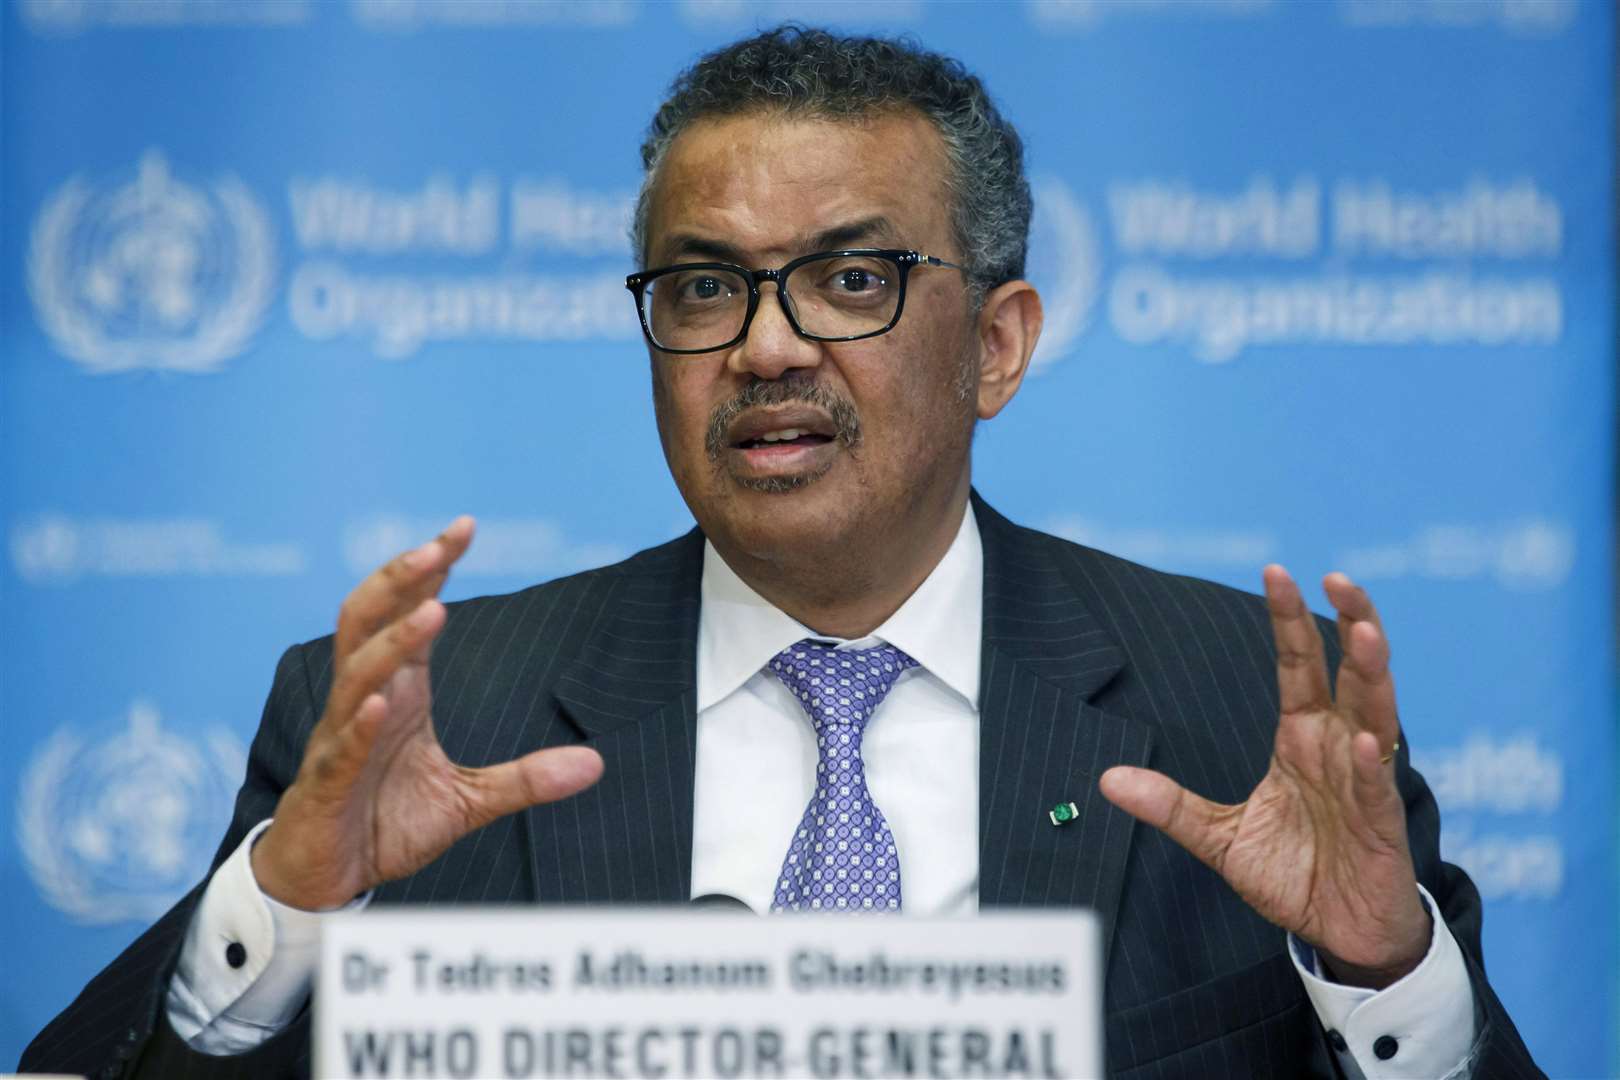 Tedros Adhanom Ghebreyesus, director general of the WHO, which continues to conduct trials searching for Covid treatments (Salvatore Di Nolfi/Keystone/AP)